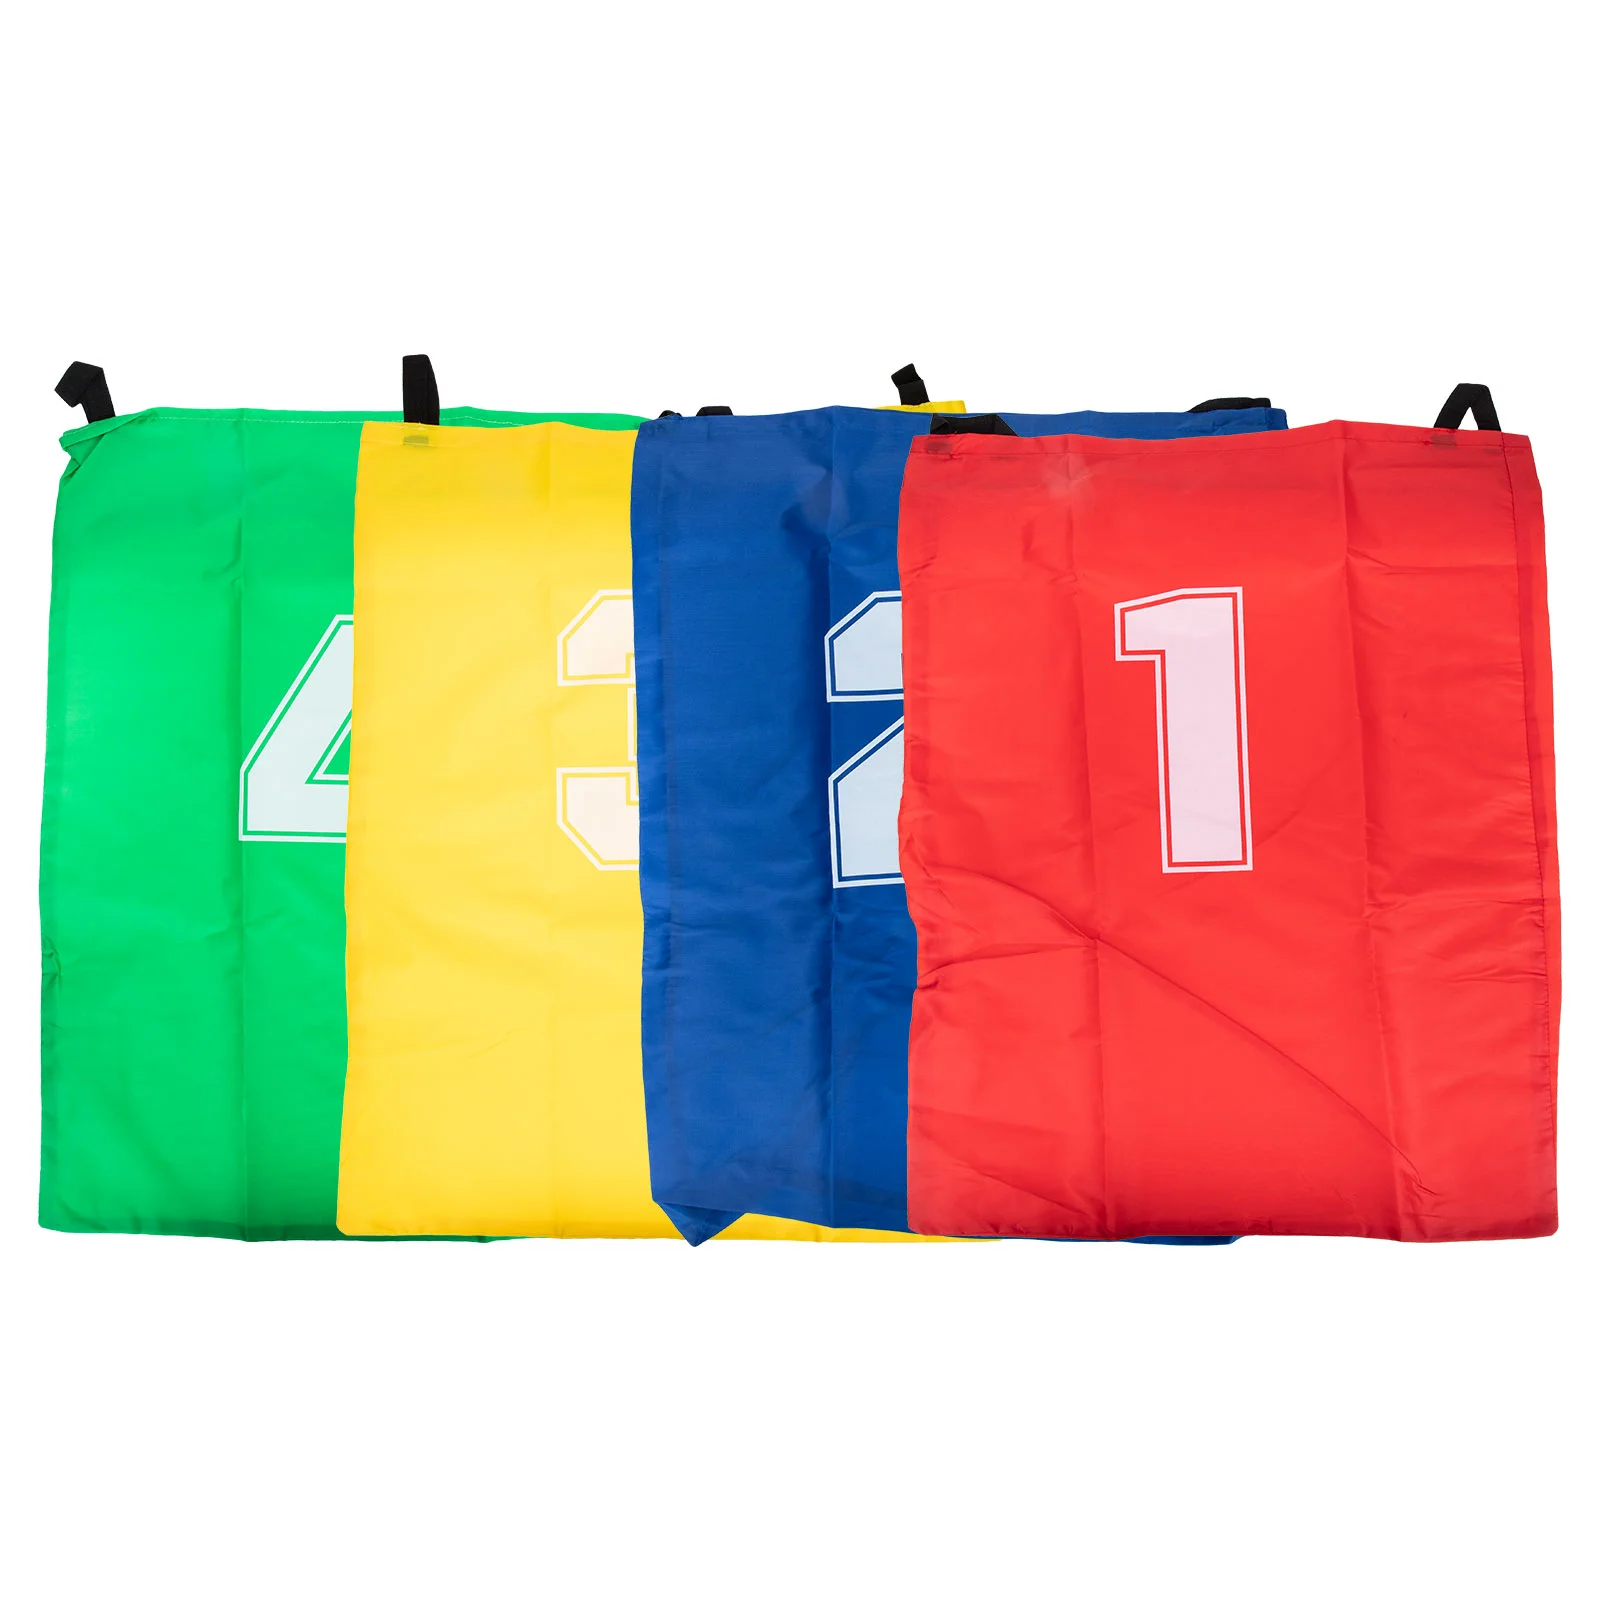 

4 Pcs Jumping Bag Kids Sack Race Toy Toys Outdoor Interactive Canvas Game Prop Child Playset